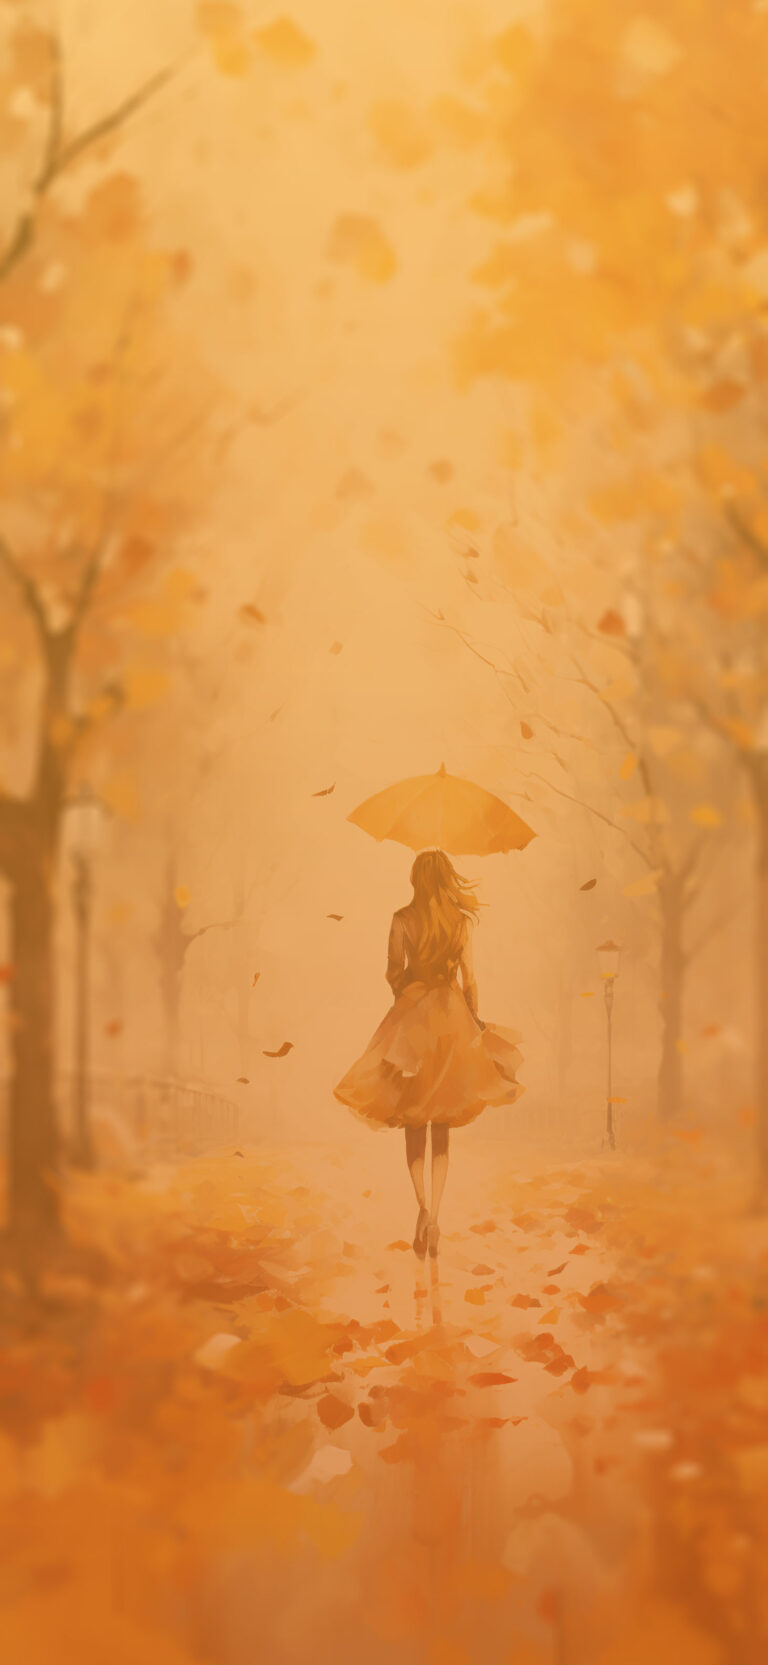 Girl under the Rain Watercolor Wallpapers - Autumn Wallpapers HD